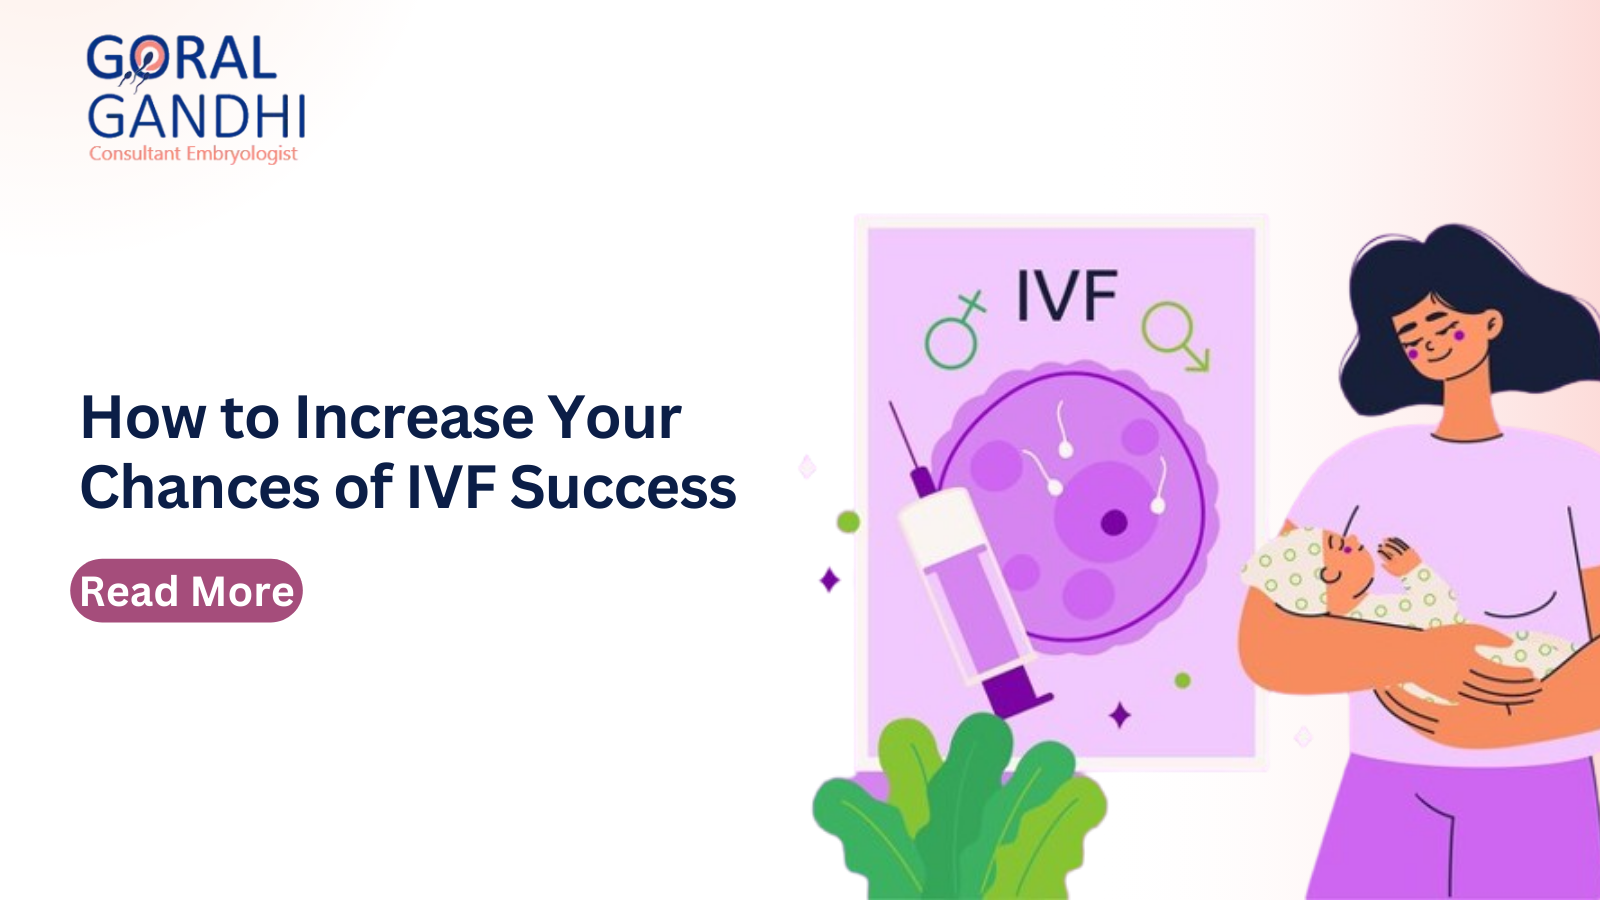 How to Increase Your Chances of IVF Success